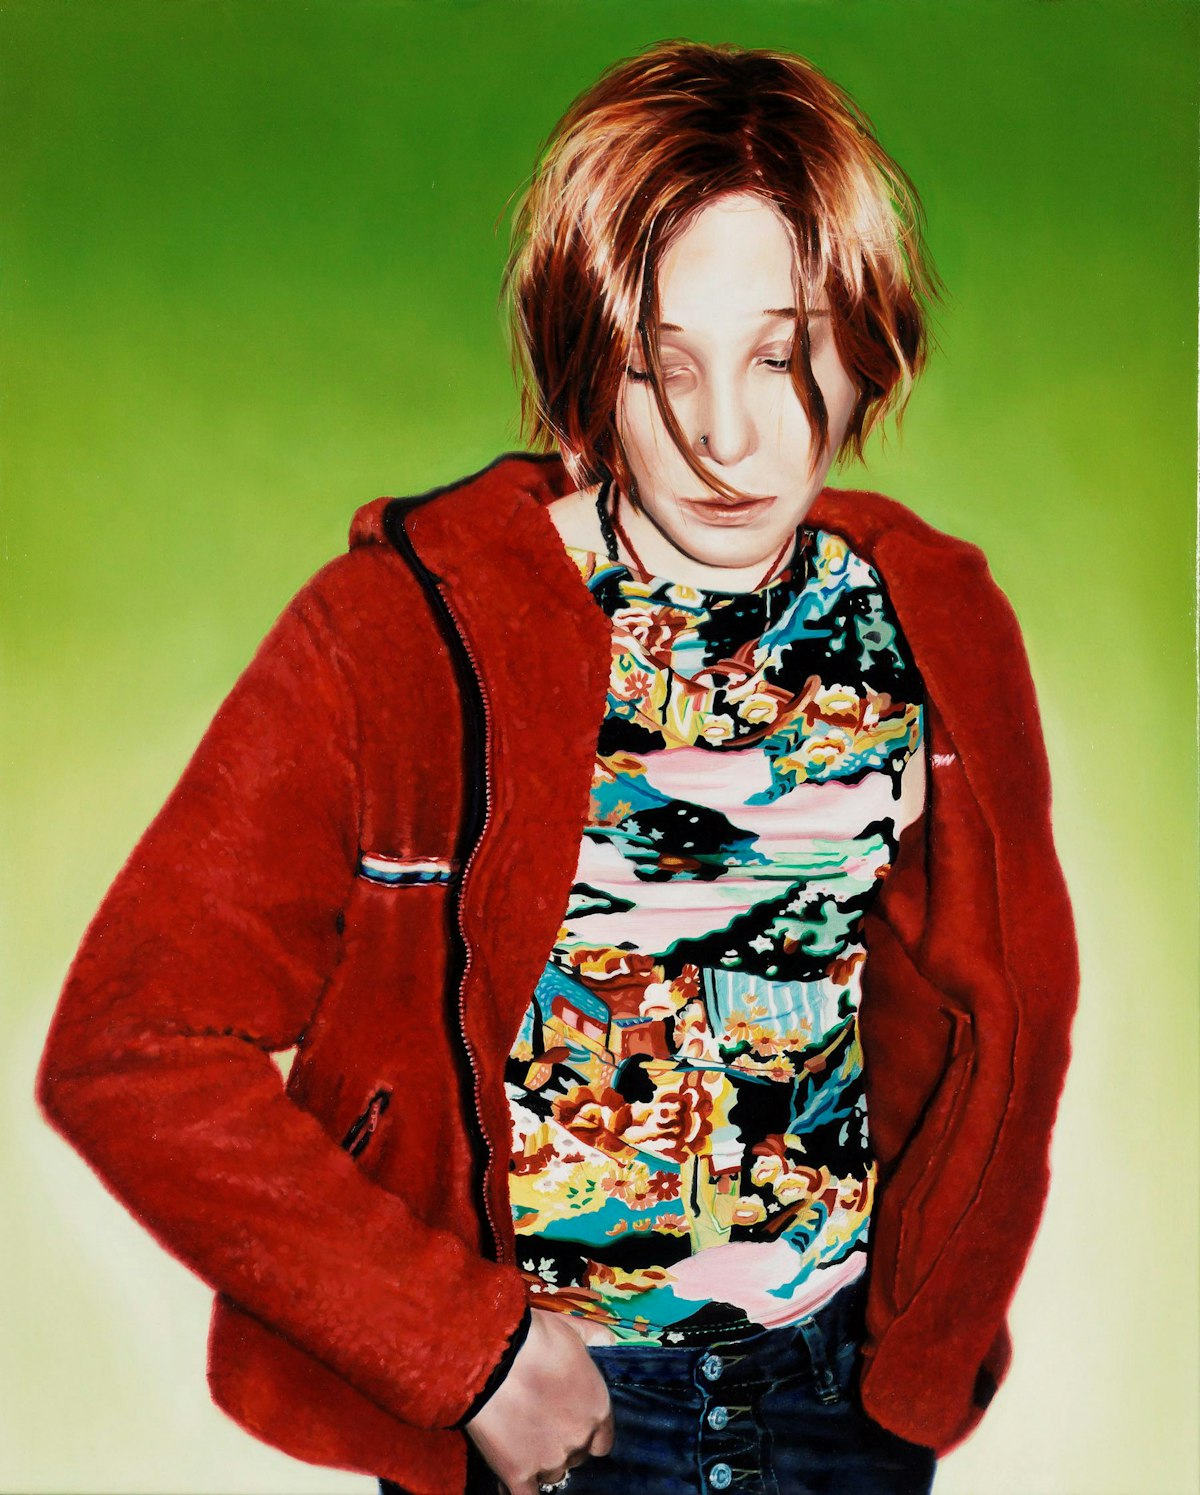 A person with orange hair wearing a red jacket, patterned top and buttoned jeans, stands against a green background